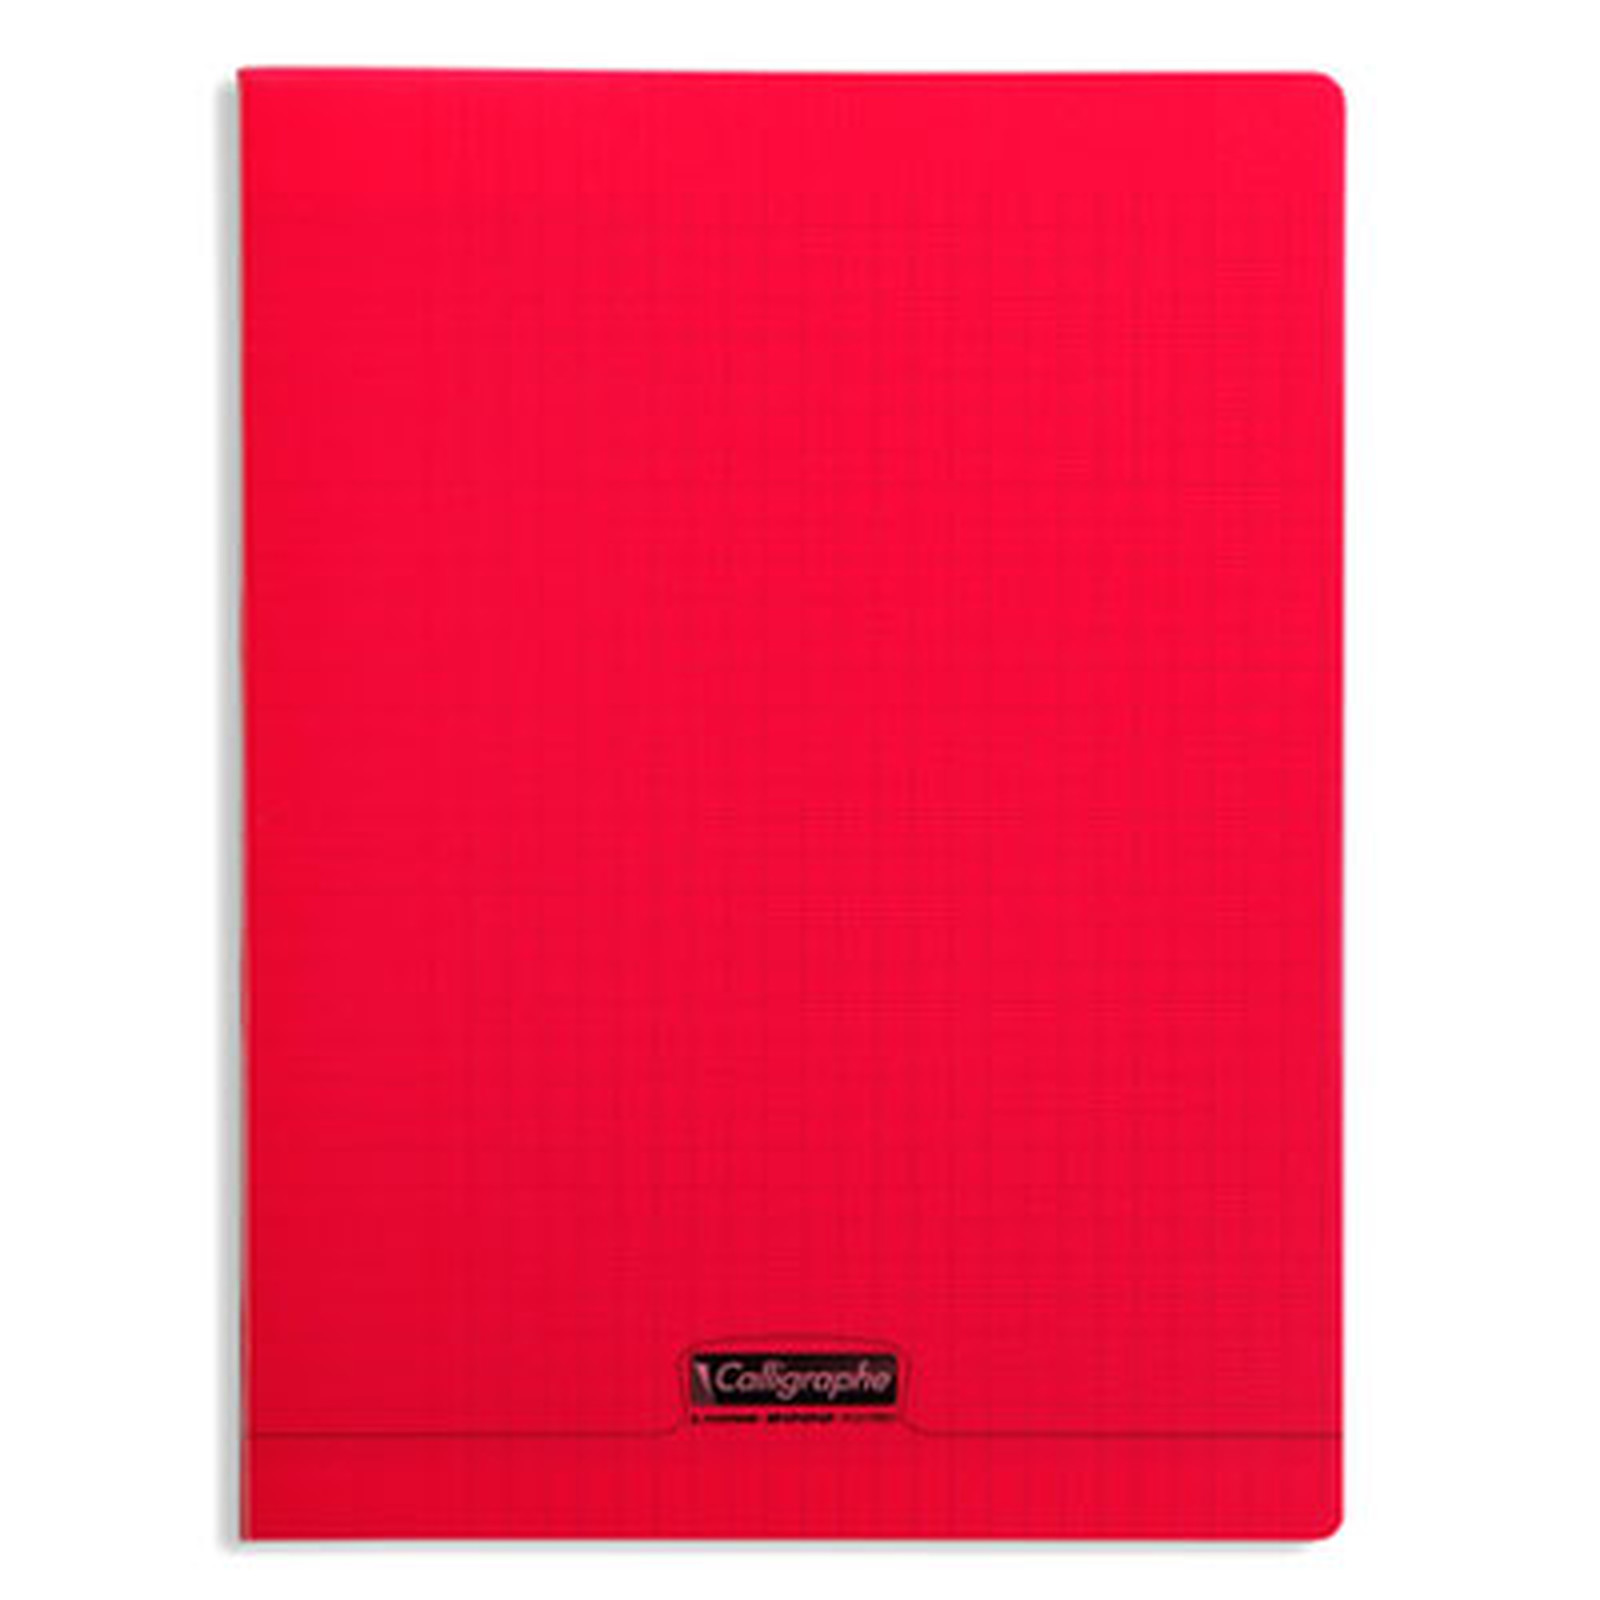 Calligraphe 8000 Polypro Cahier 96 pages 24 x 32 cm seyes grands carreaux Rouge - Cahier Calligraphe